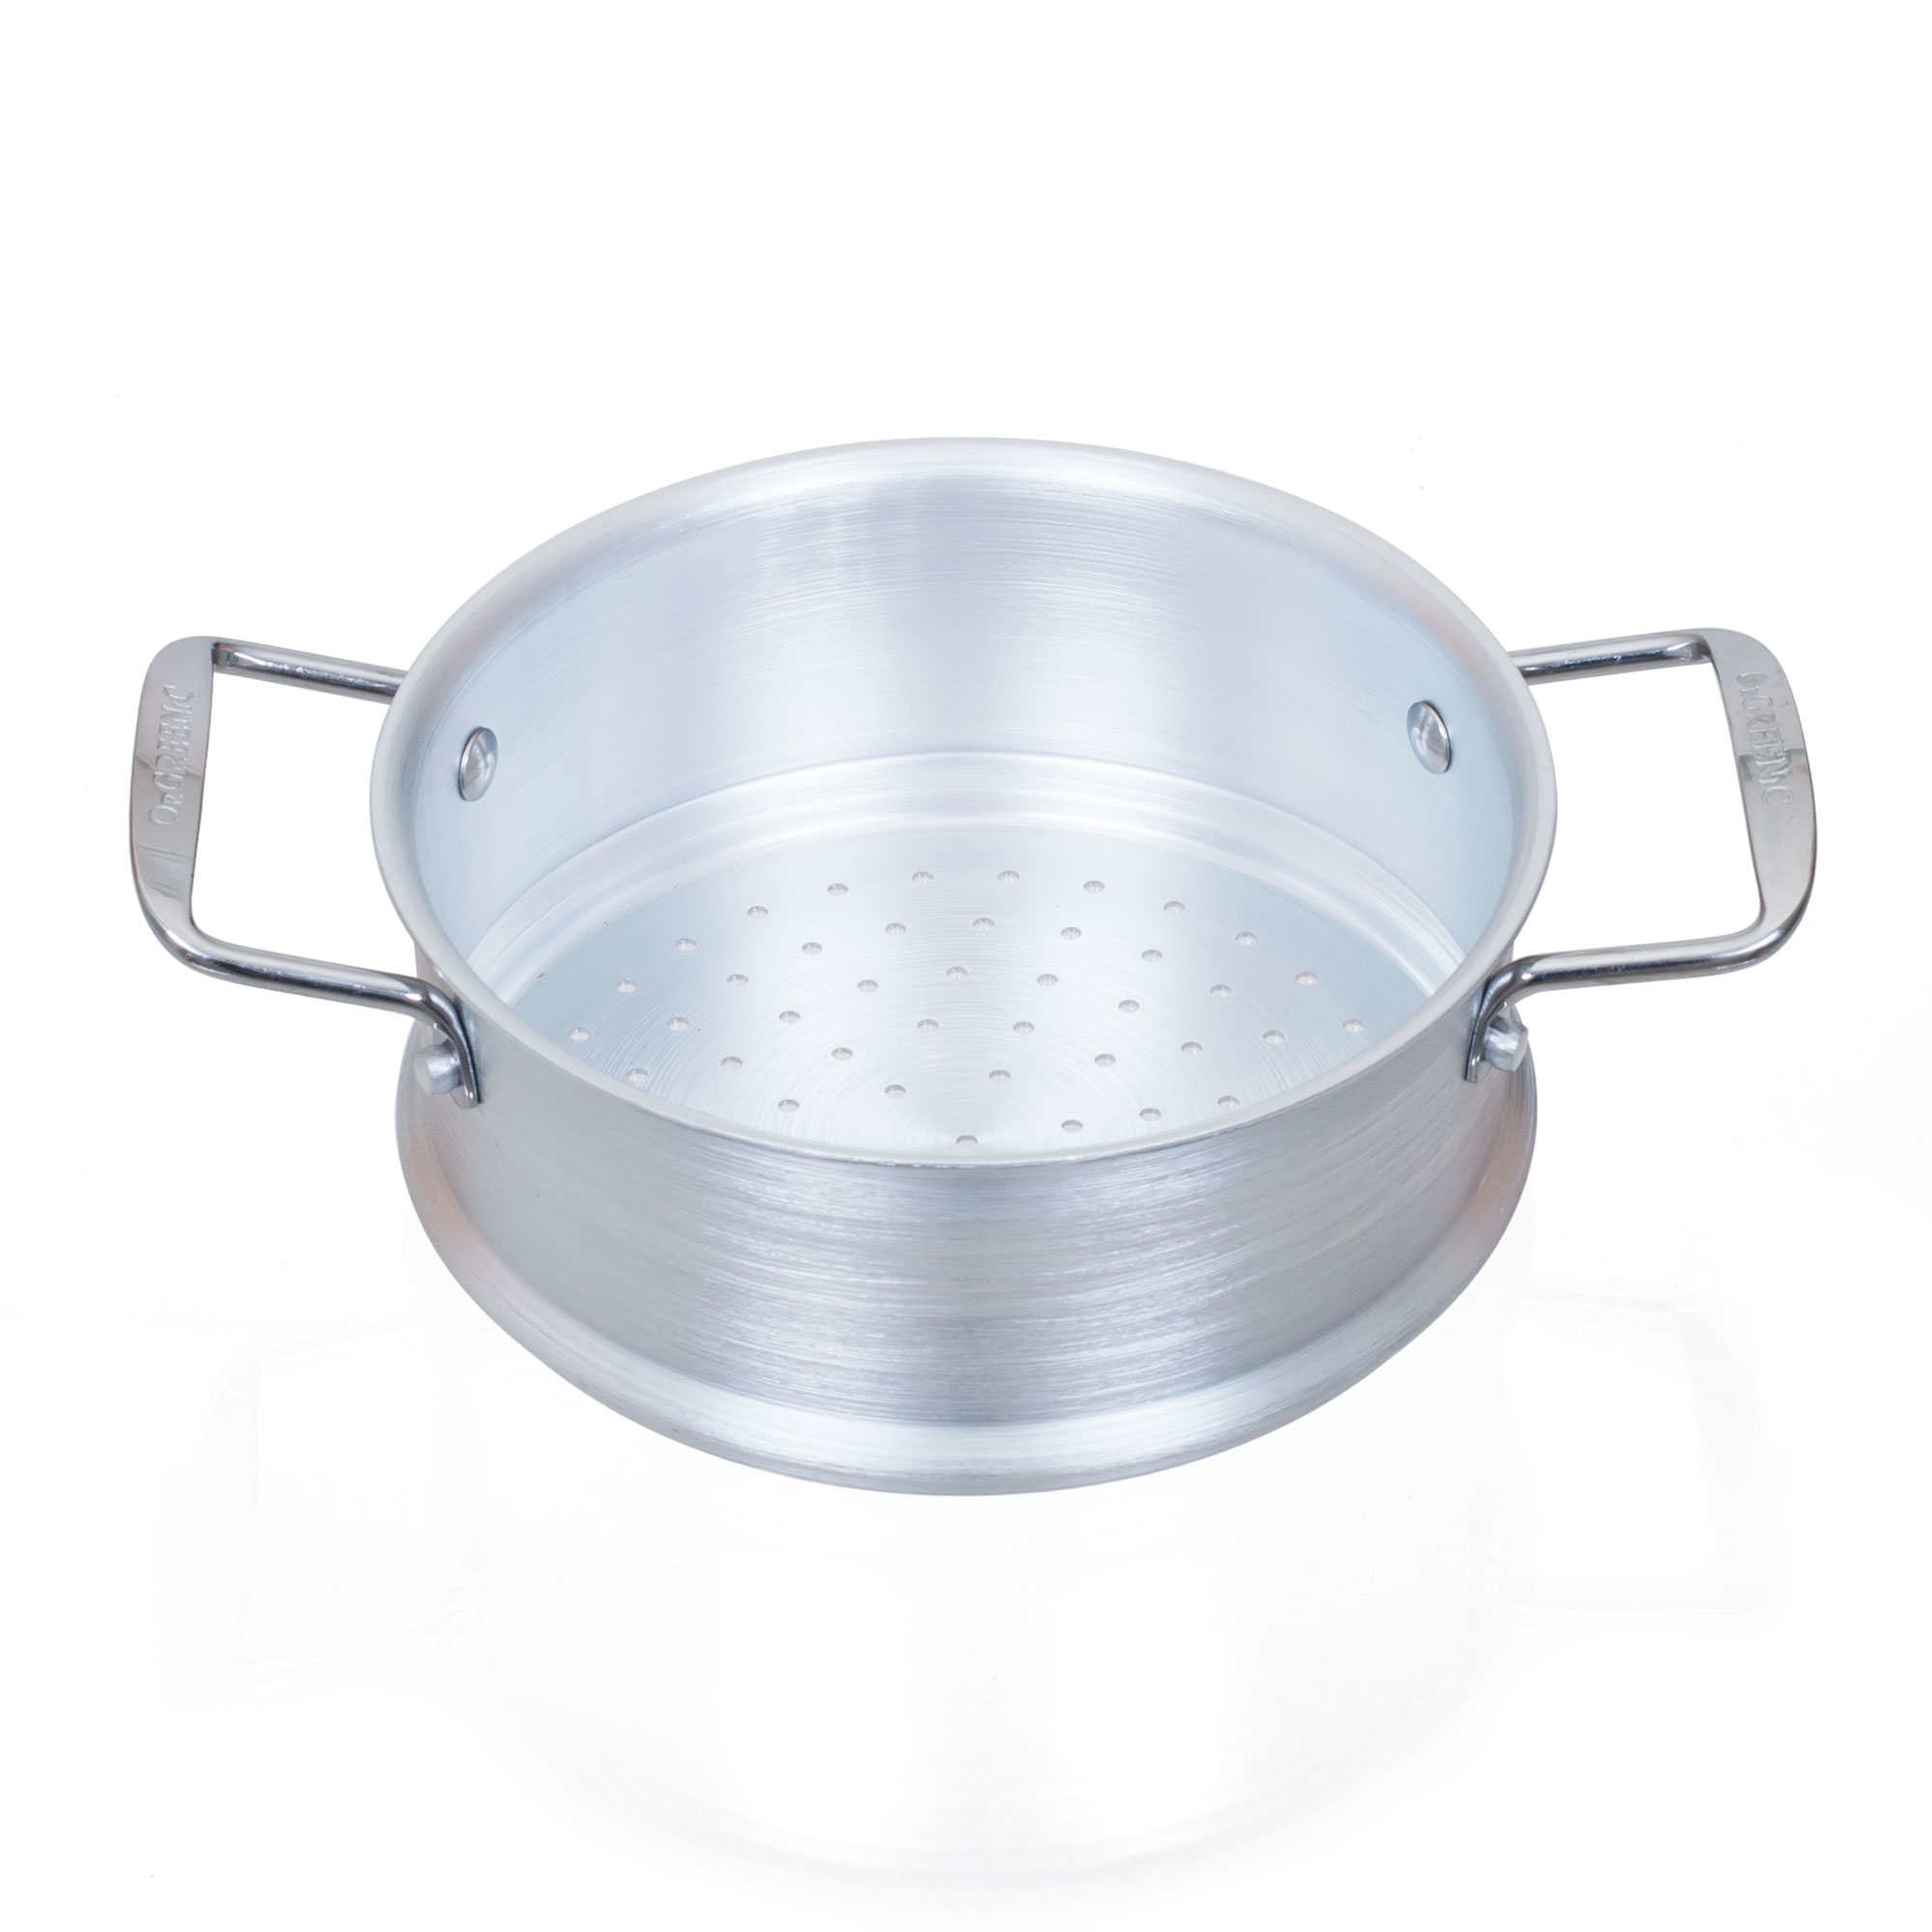 High Quality Aluminum Steamer Insert for Stock Pot or Pan 3.4 In. Deep x 8.35 inches Fits 6 Quart Pot